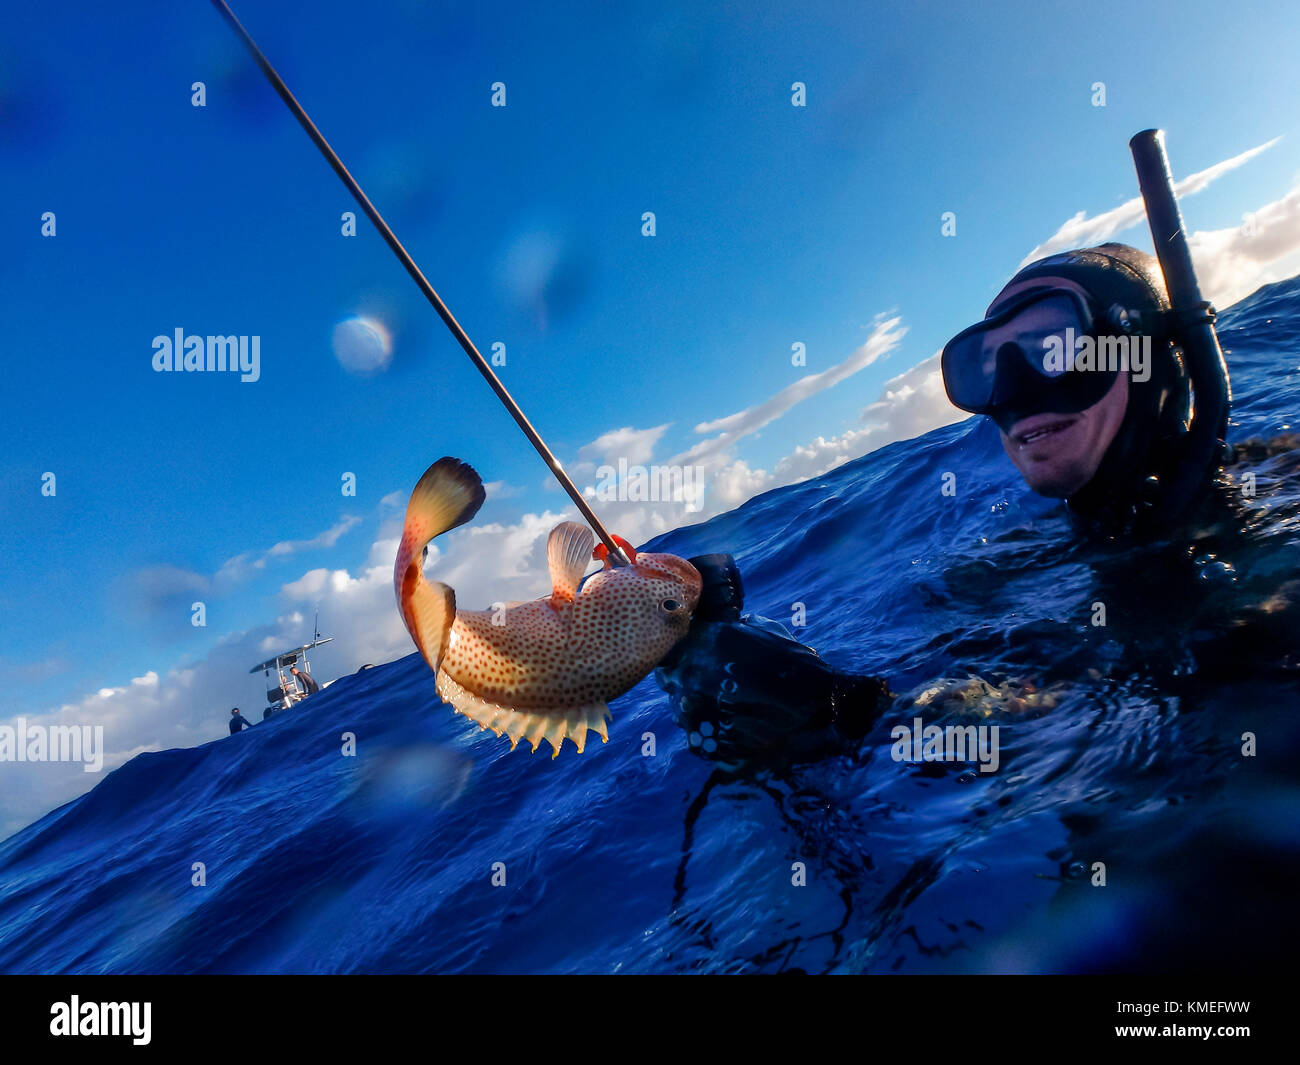 Diver smiling and holding caught hogfish in ocean while spearfishing, Clarence Town, Long Island, Bahamas Stock Photo